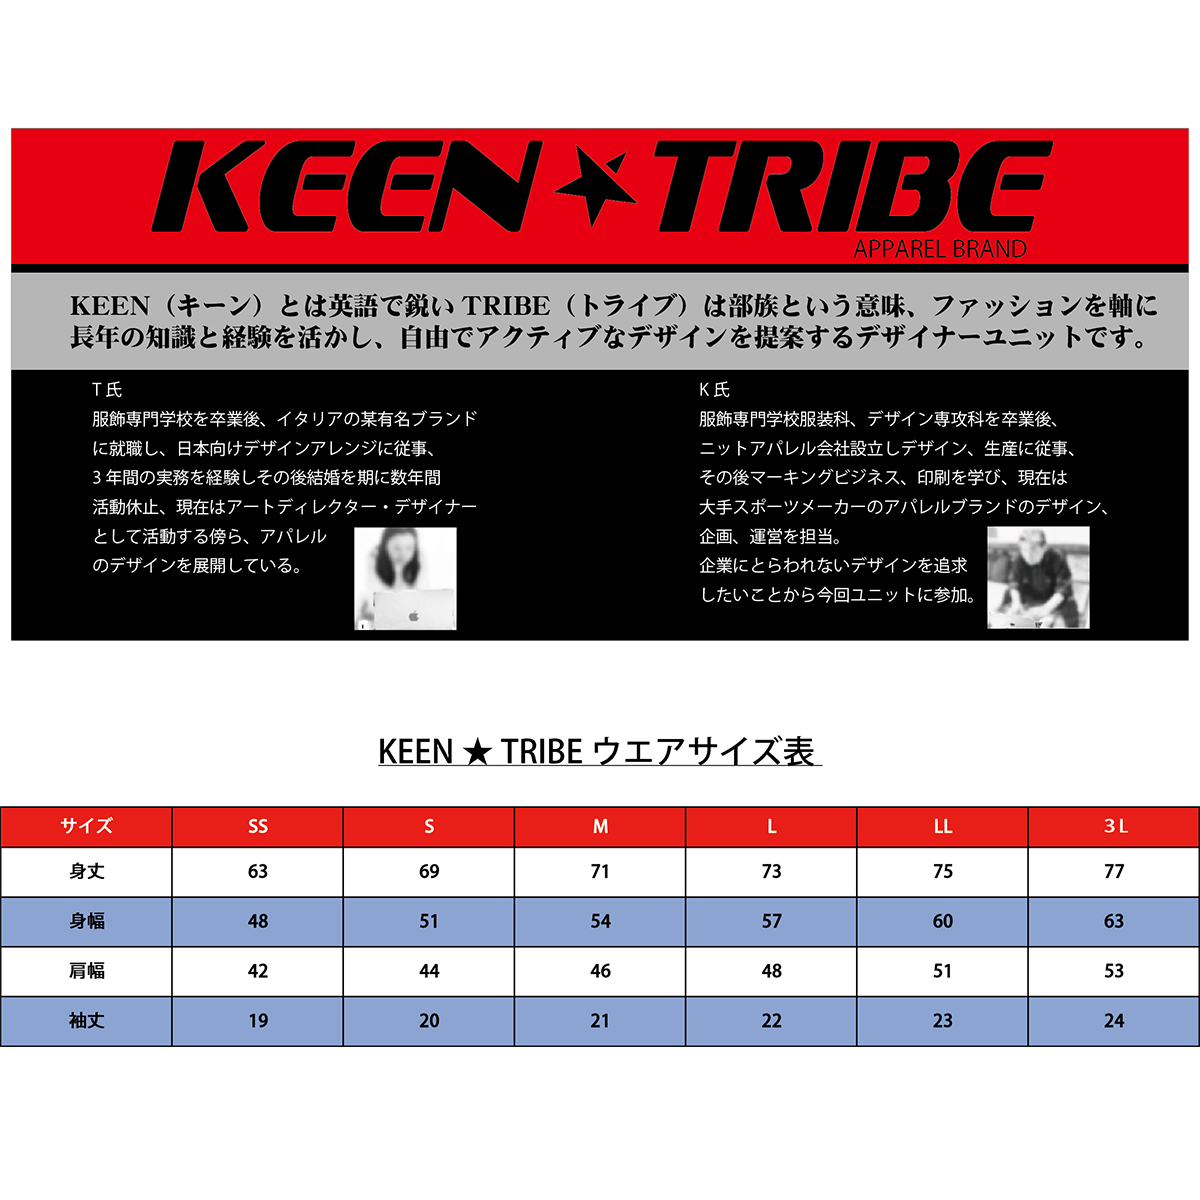 KEEN ★ TRIBE　KT-32(受注生産)